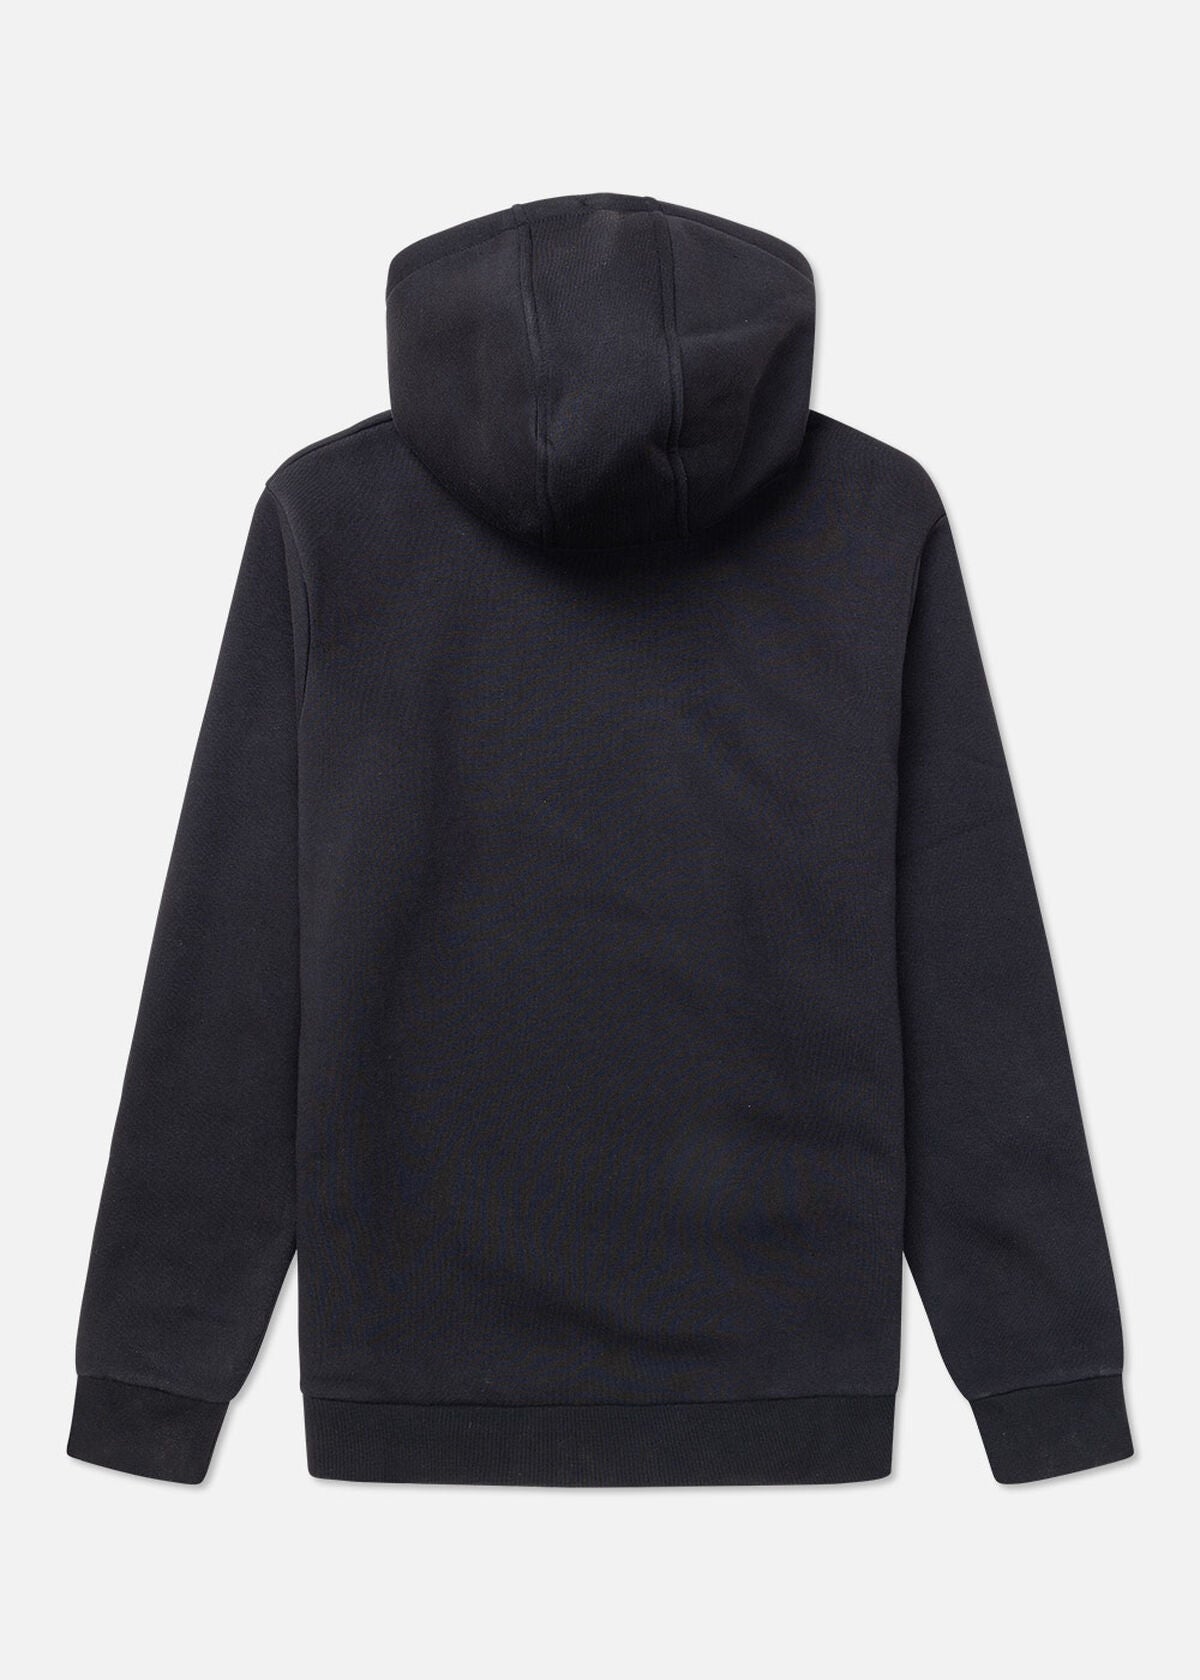 Off The Pitch Blackfriday Revel Hoodie